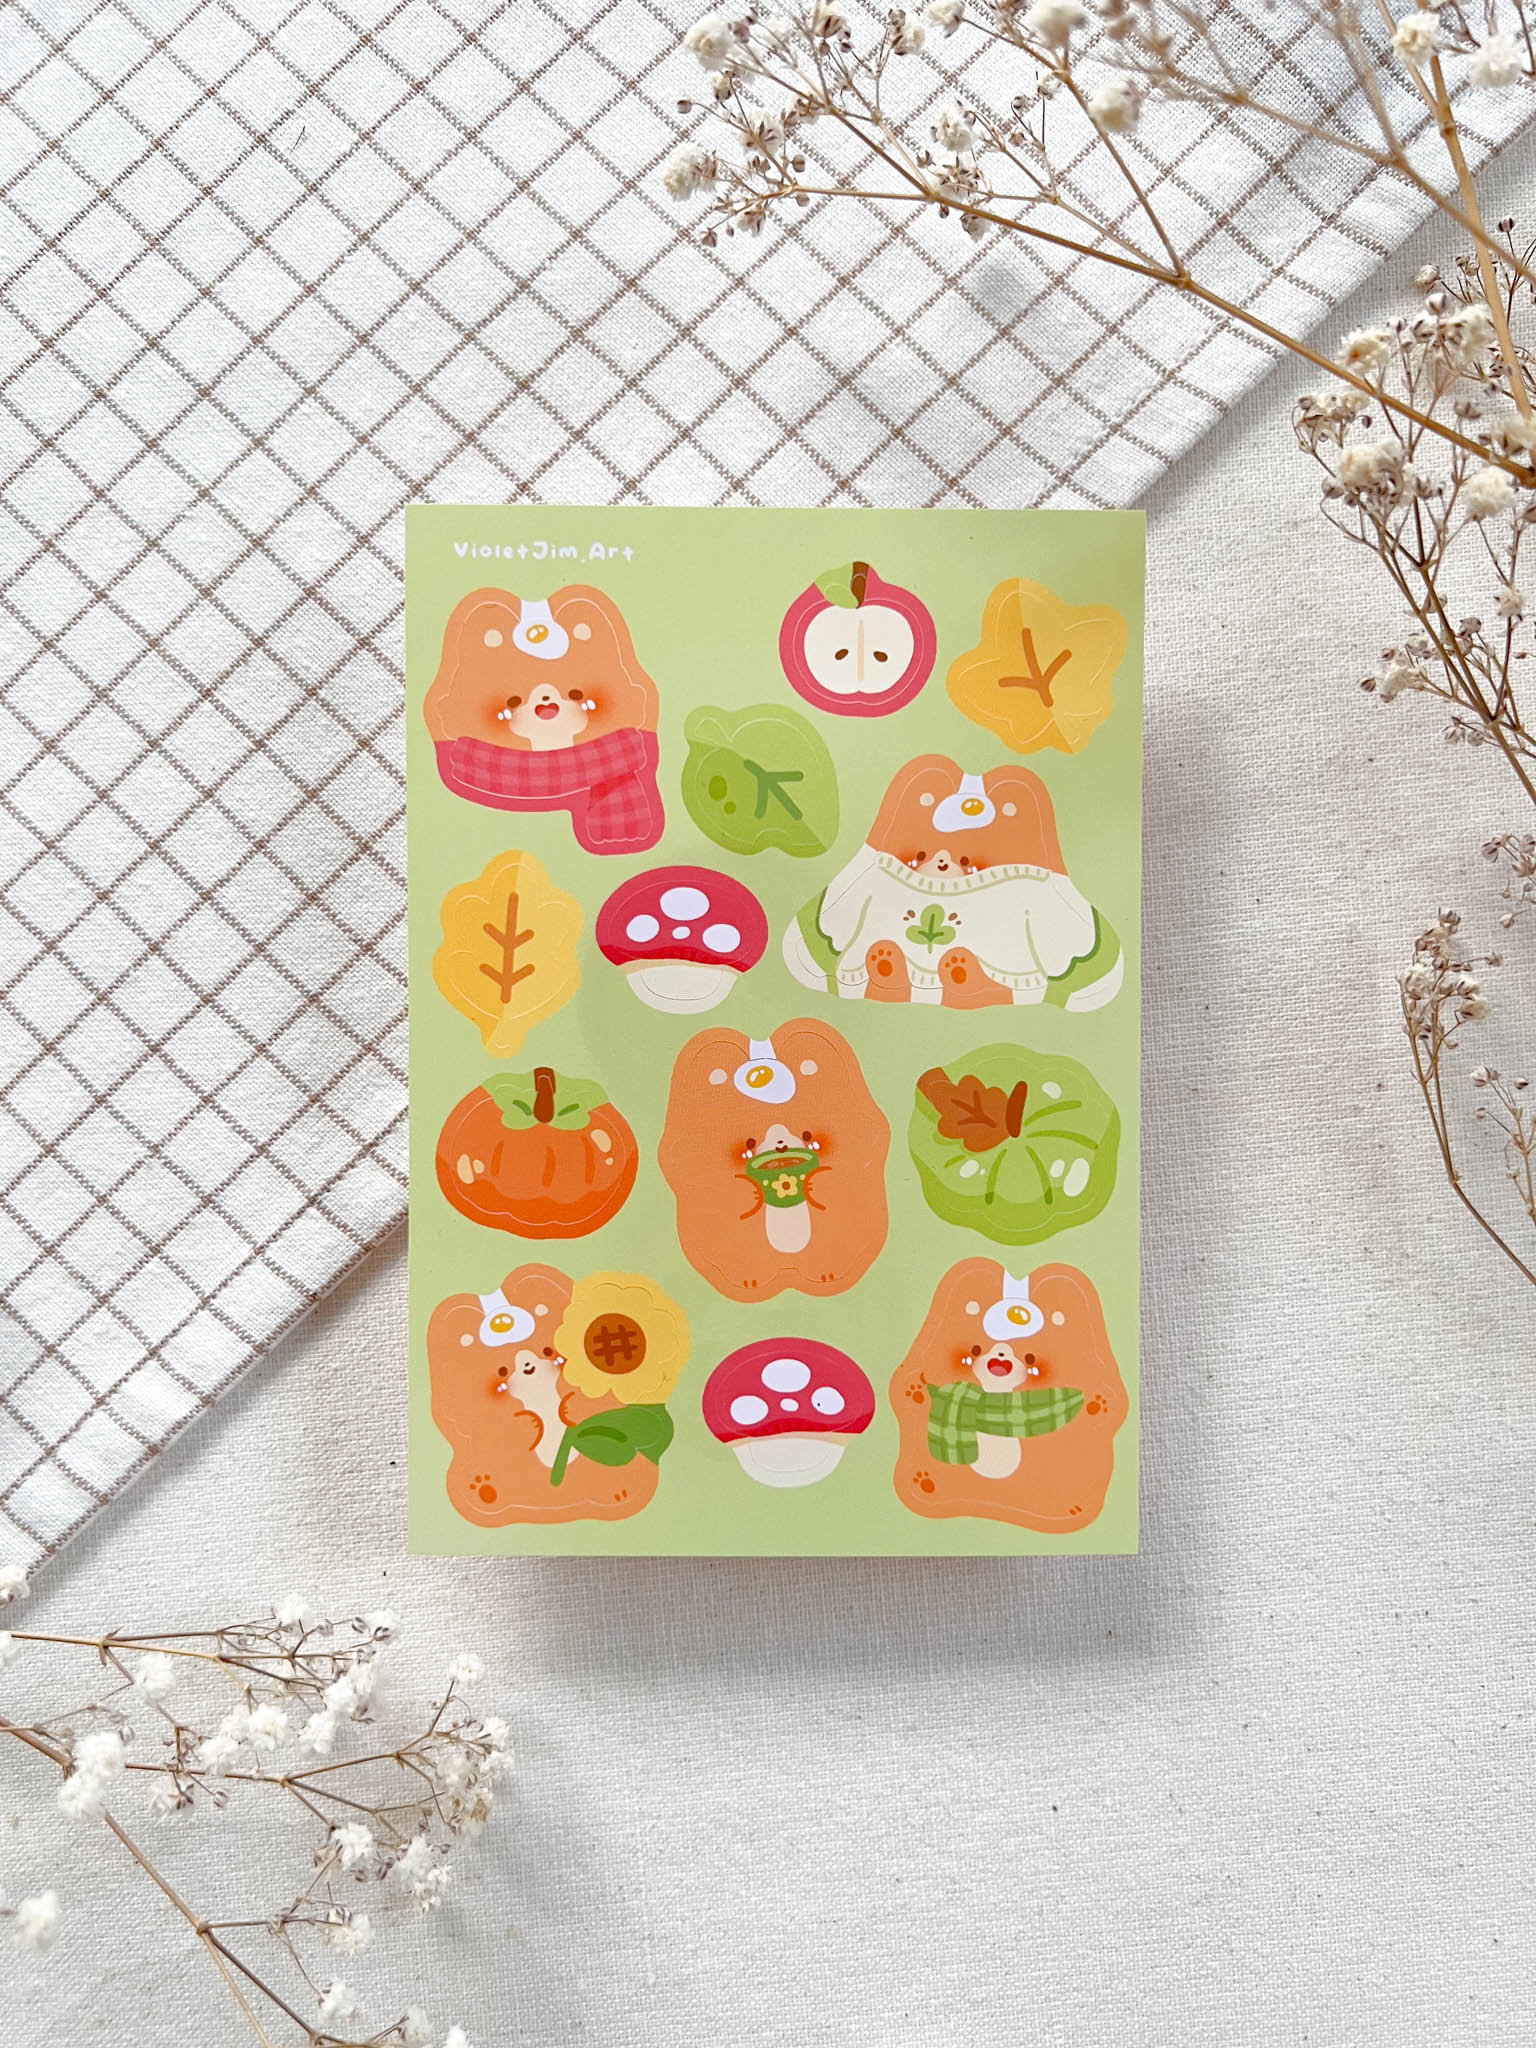 Autumn Themed Matte Vinyl Sticker Sheet - Corgi Mochi with Pumpkins and Fall Leaves - Water Resistant & High Quality - A6 Size